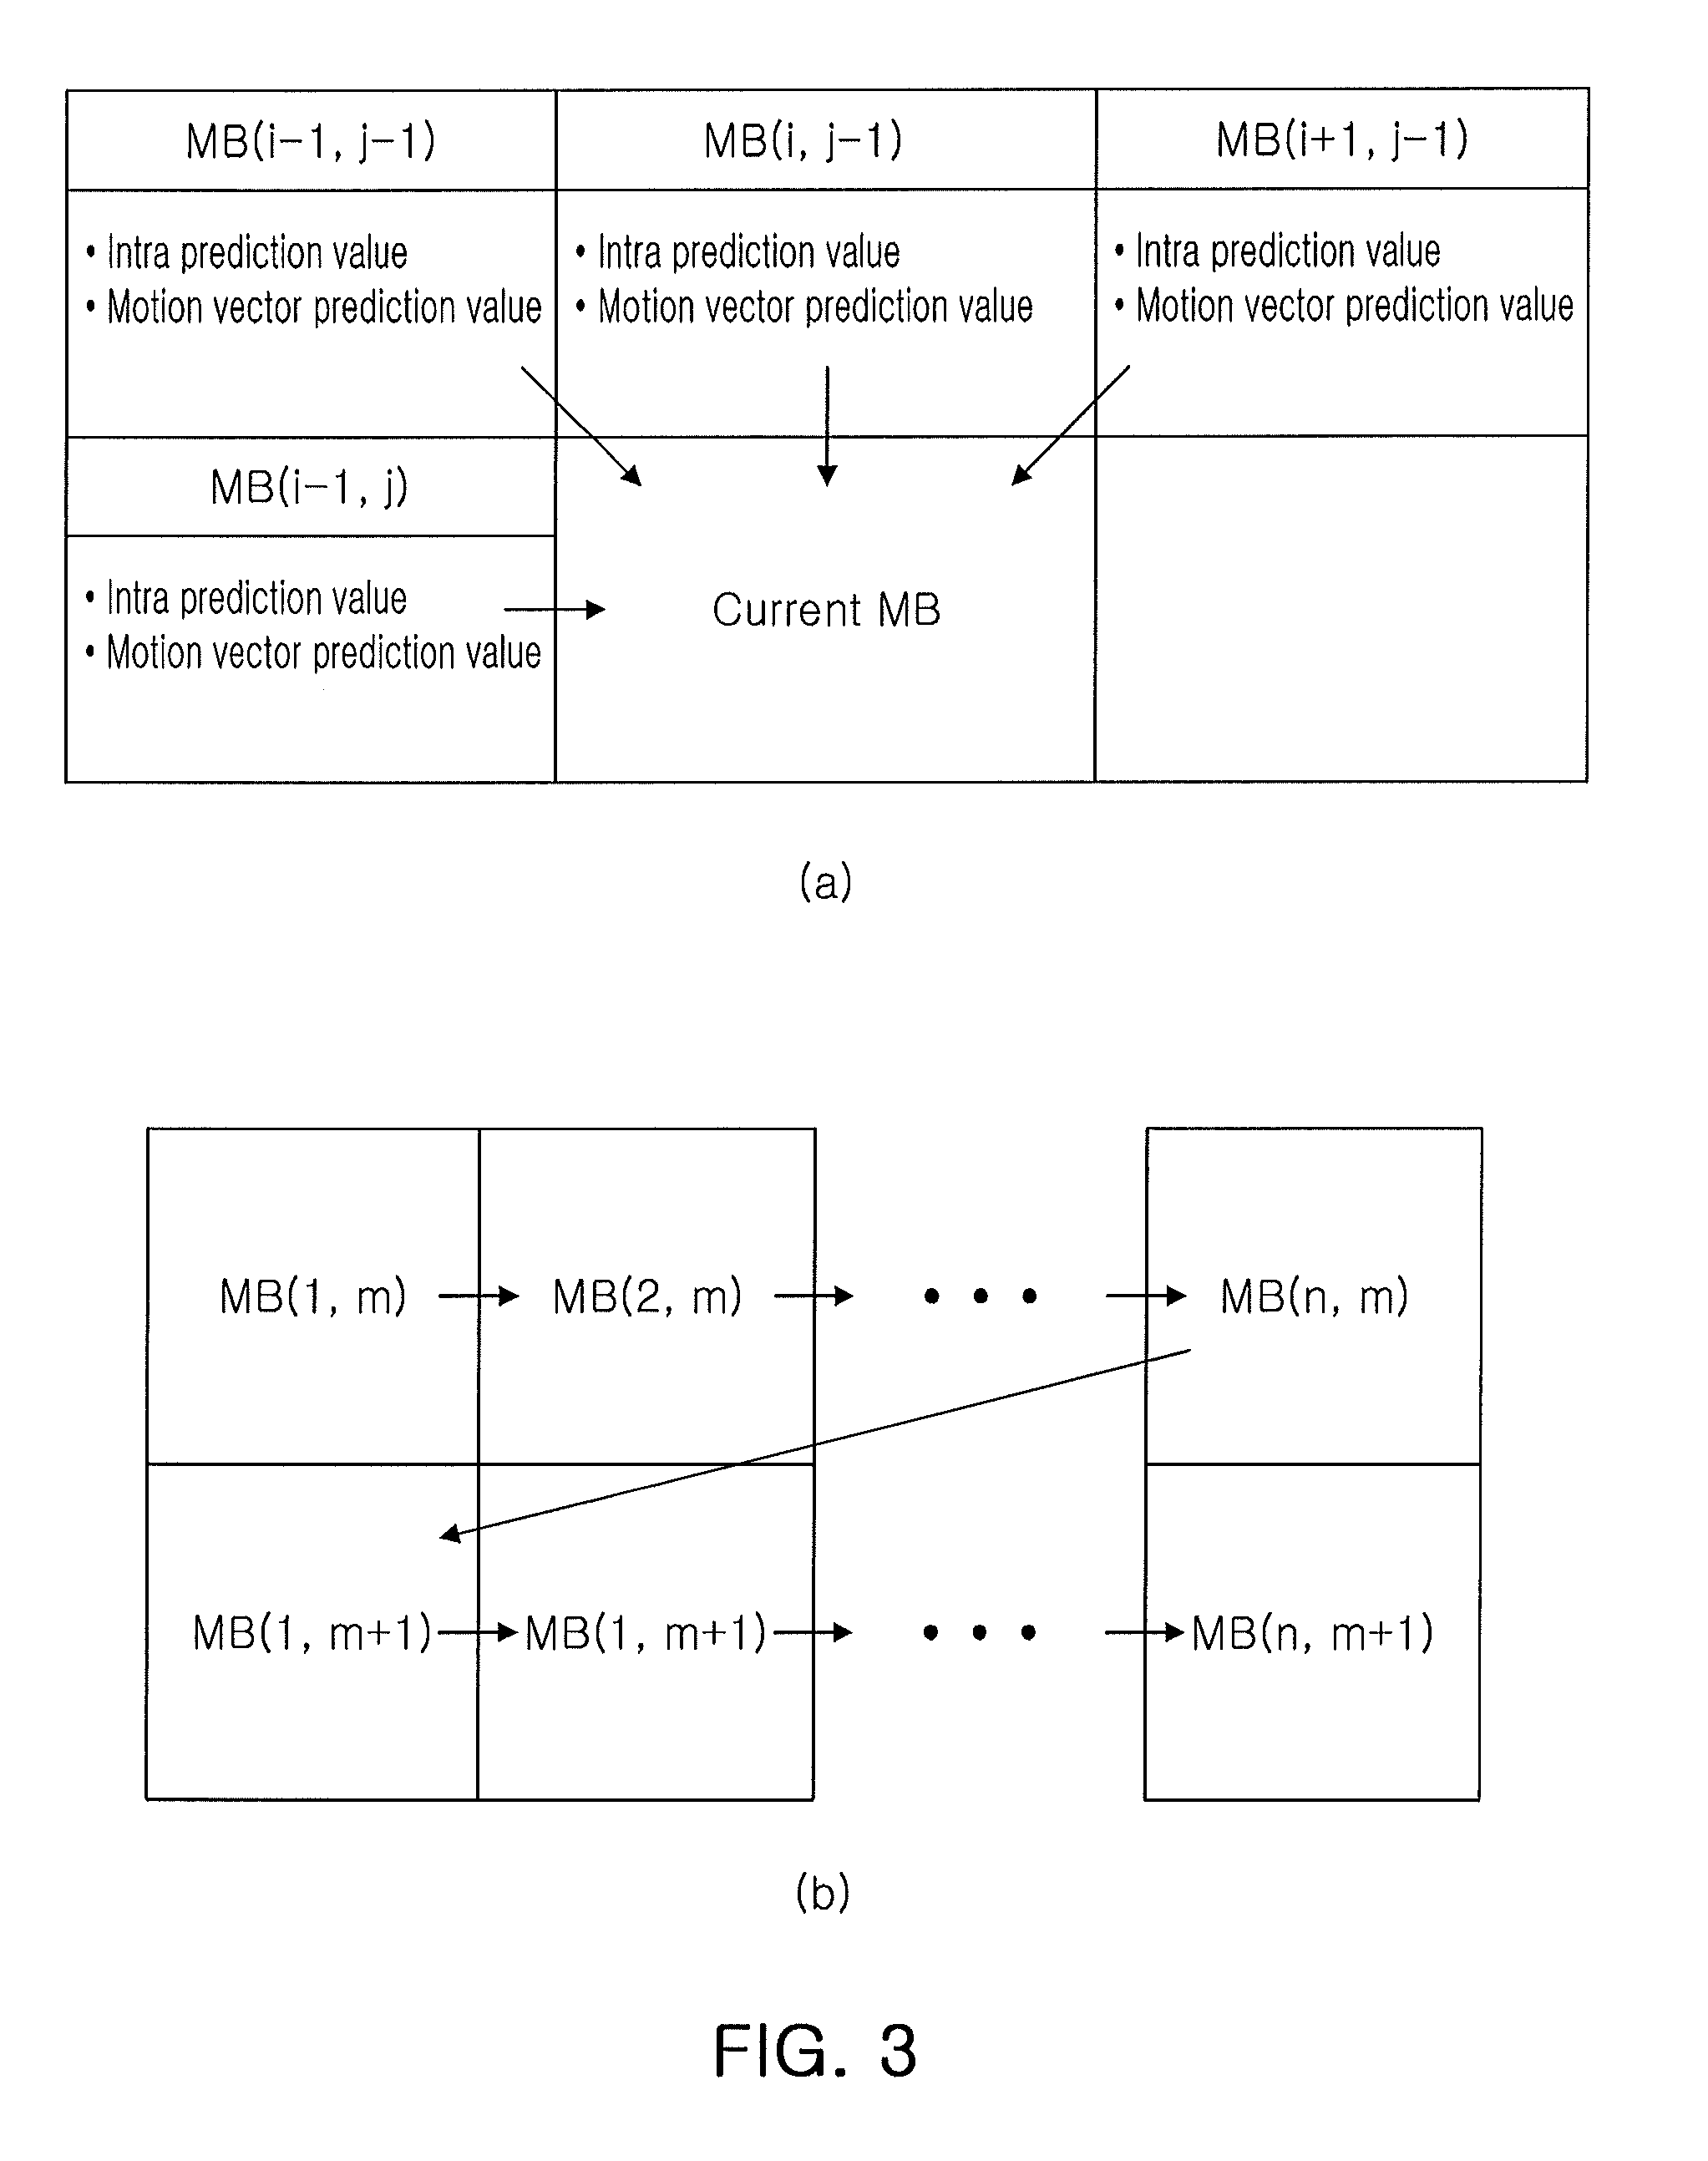 Video decoding apparatus and method based on multiprocessor